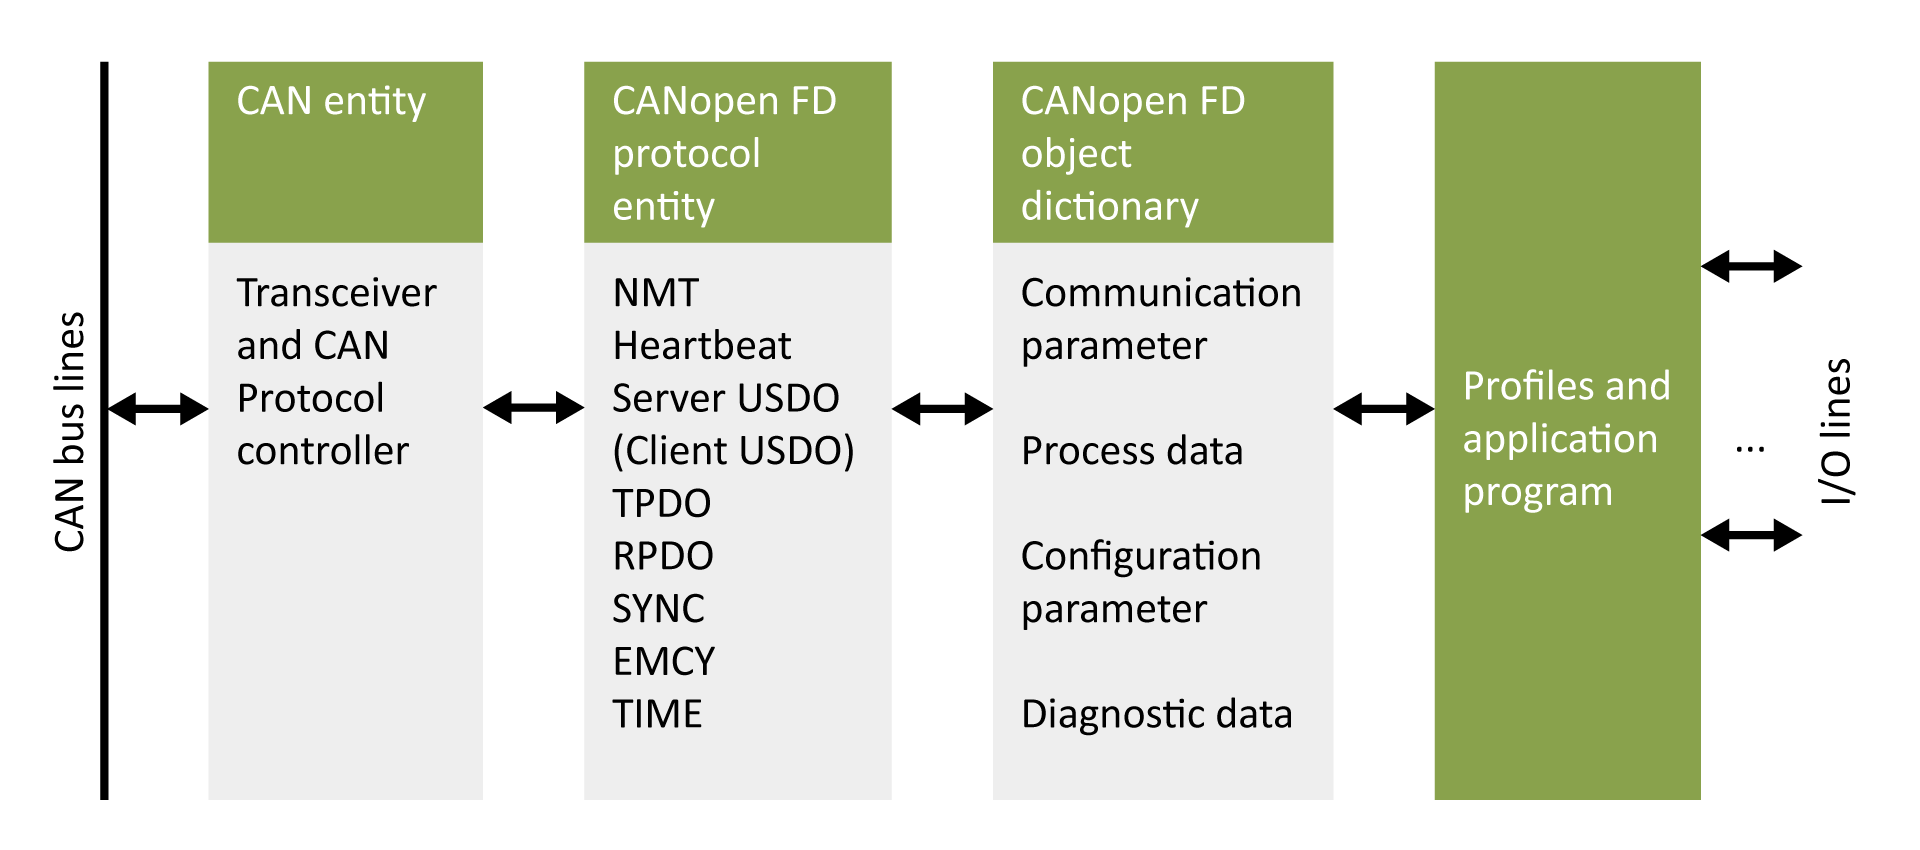 The CANopen FD device model